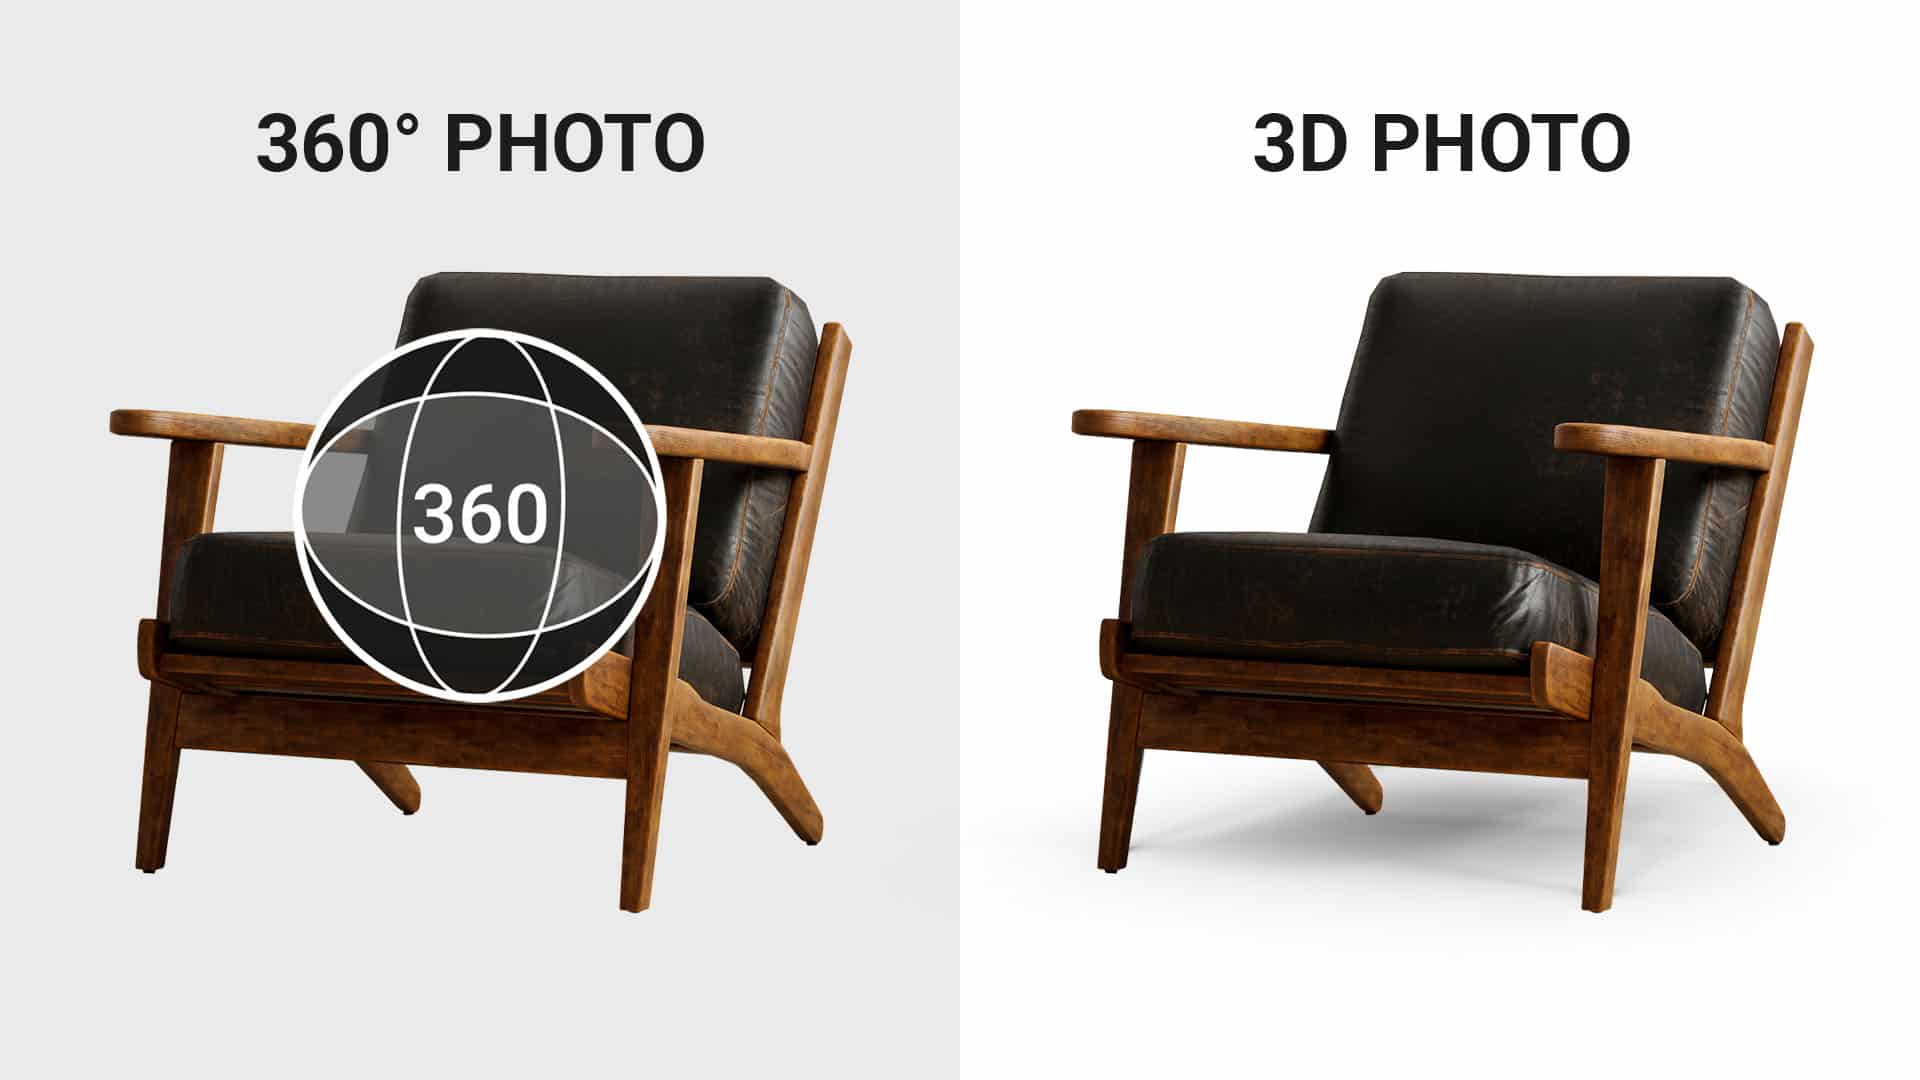 Furniture Photoshoot and 360 Result